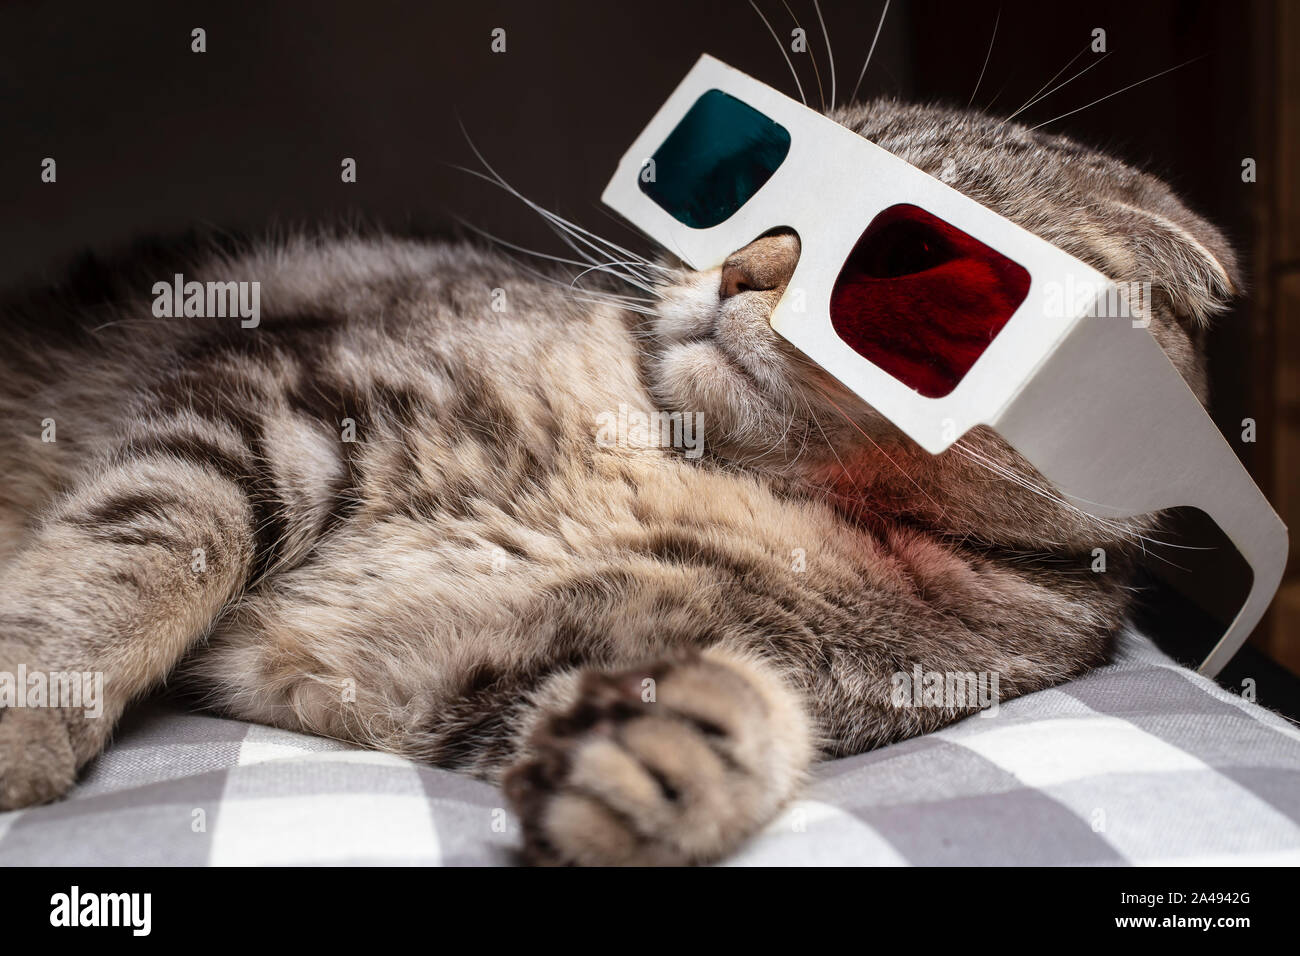 Funny scottish fold cat wore 3D glasses and watching a movie on the television set, resting on the couch Stock Photo